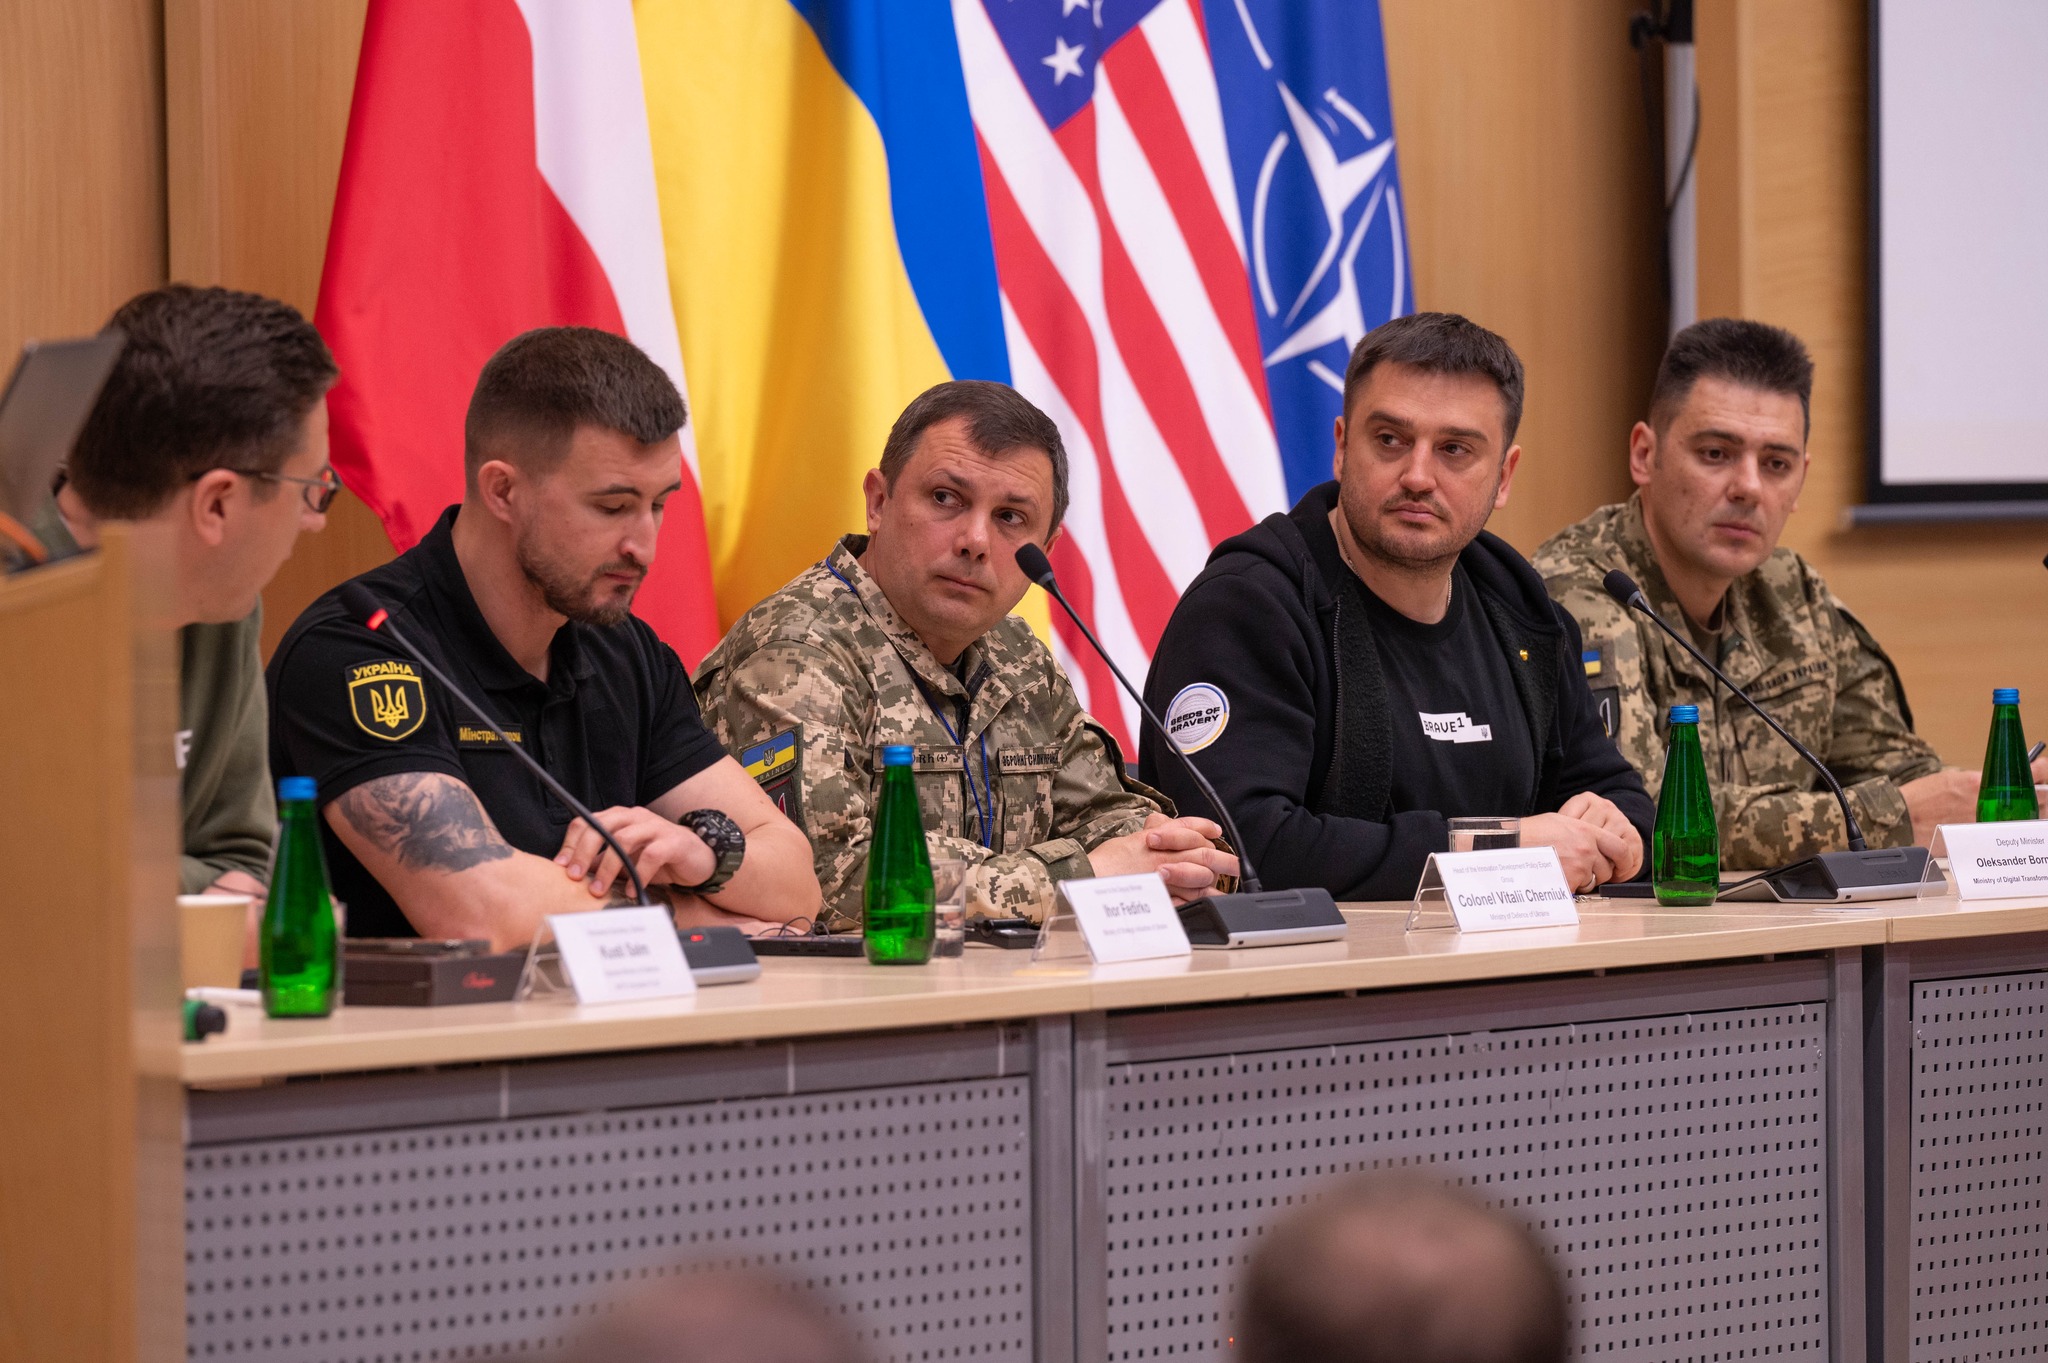 Brave1, NATO, and the Defense Innovation Unit conducted the first-ever NATO-Ukraine Defense Innovators Forum in history